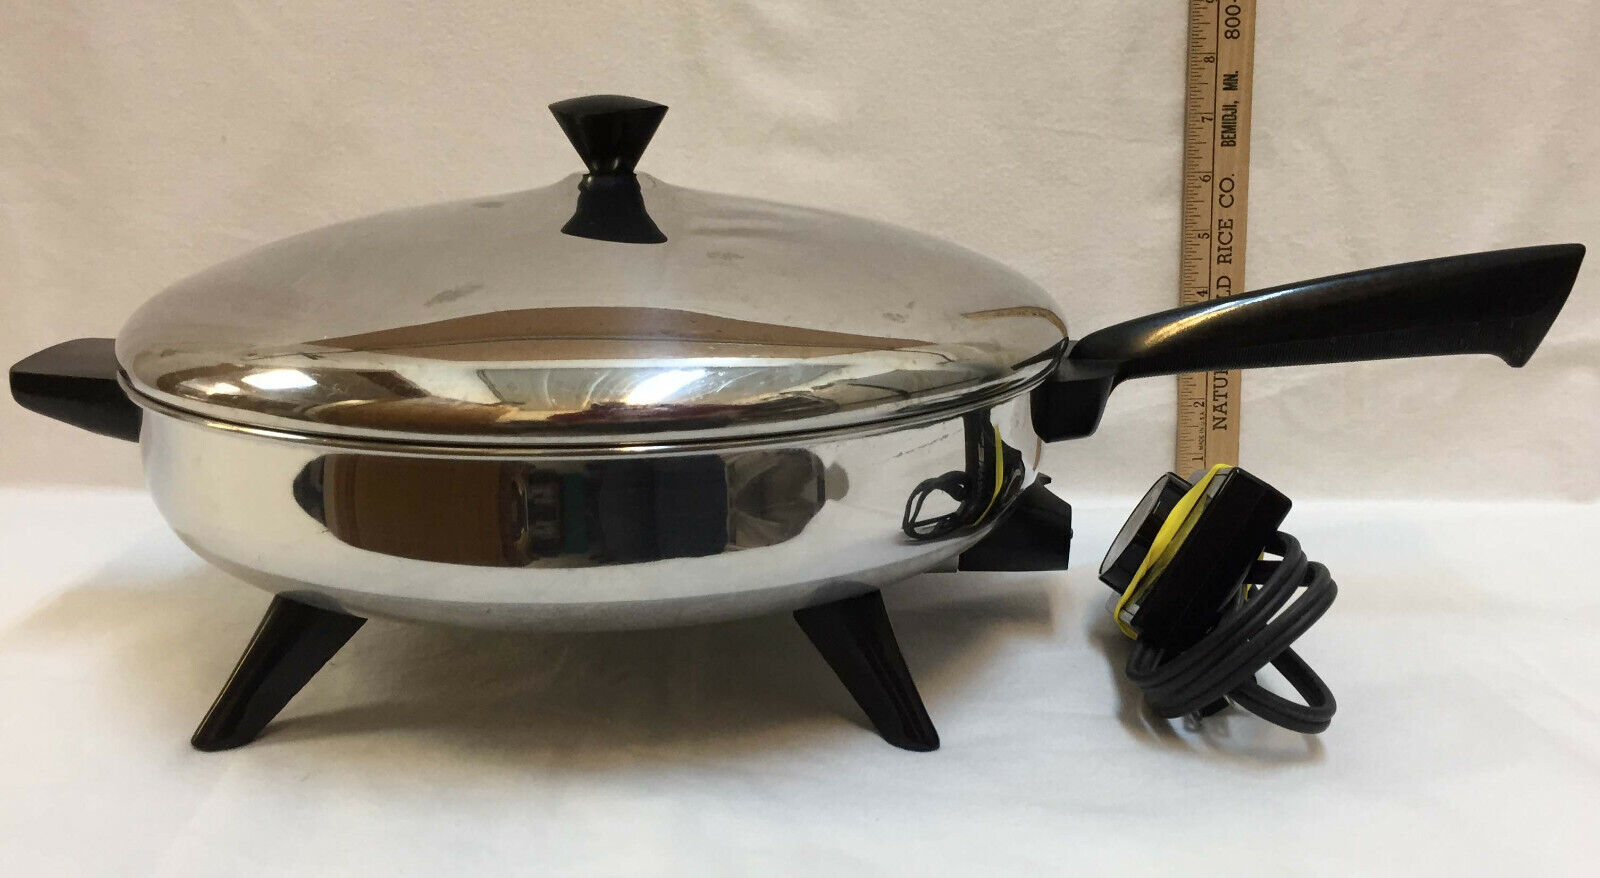 https://storables.com/wp-content/uploads/2023/07/what-is-the-size-of-the-farberware-electric-skillet-1690066472.jpg